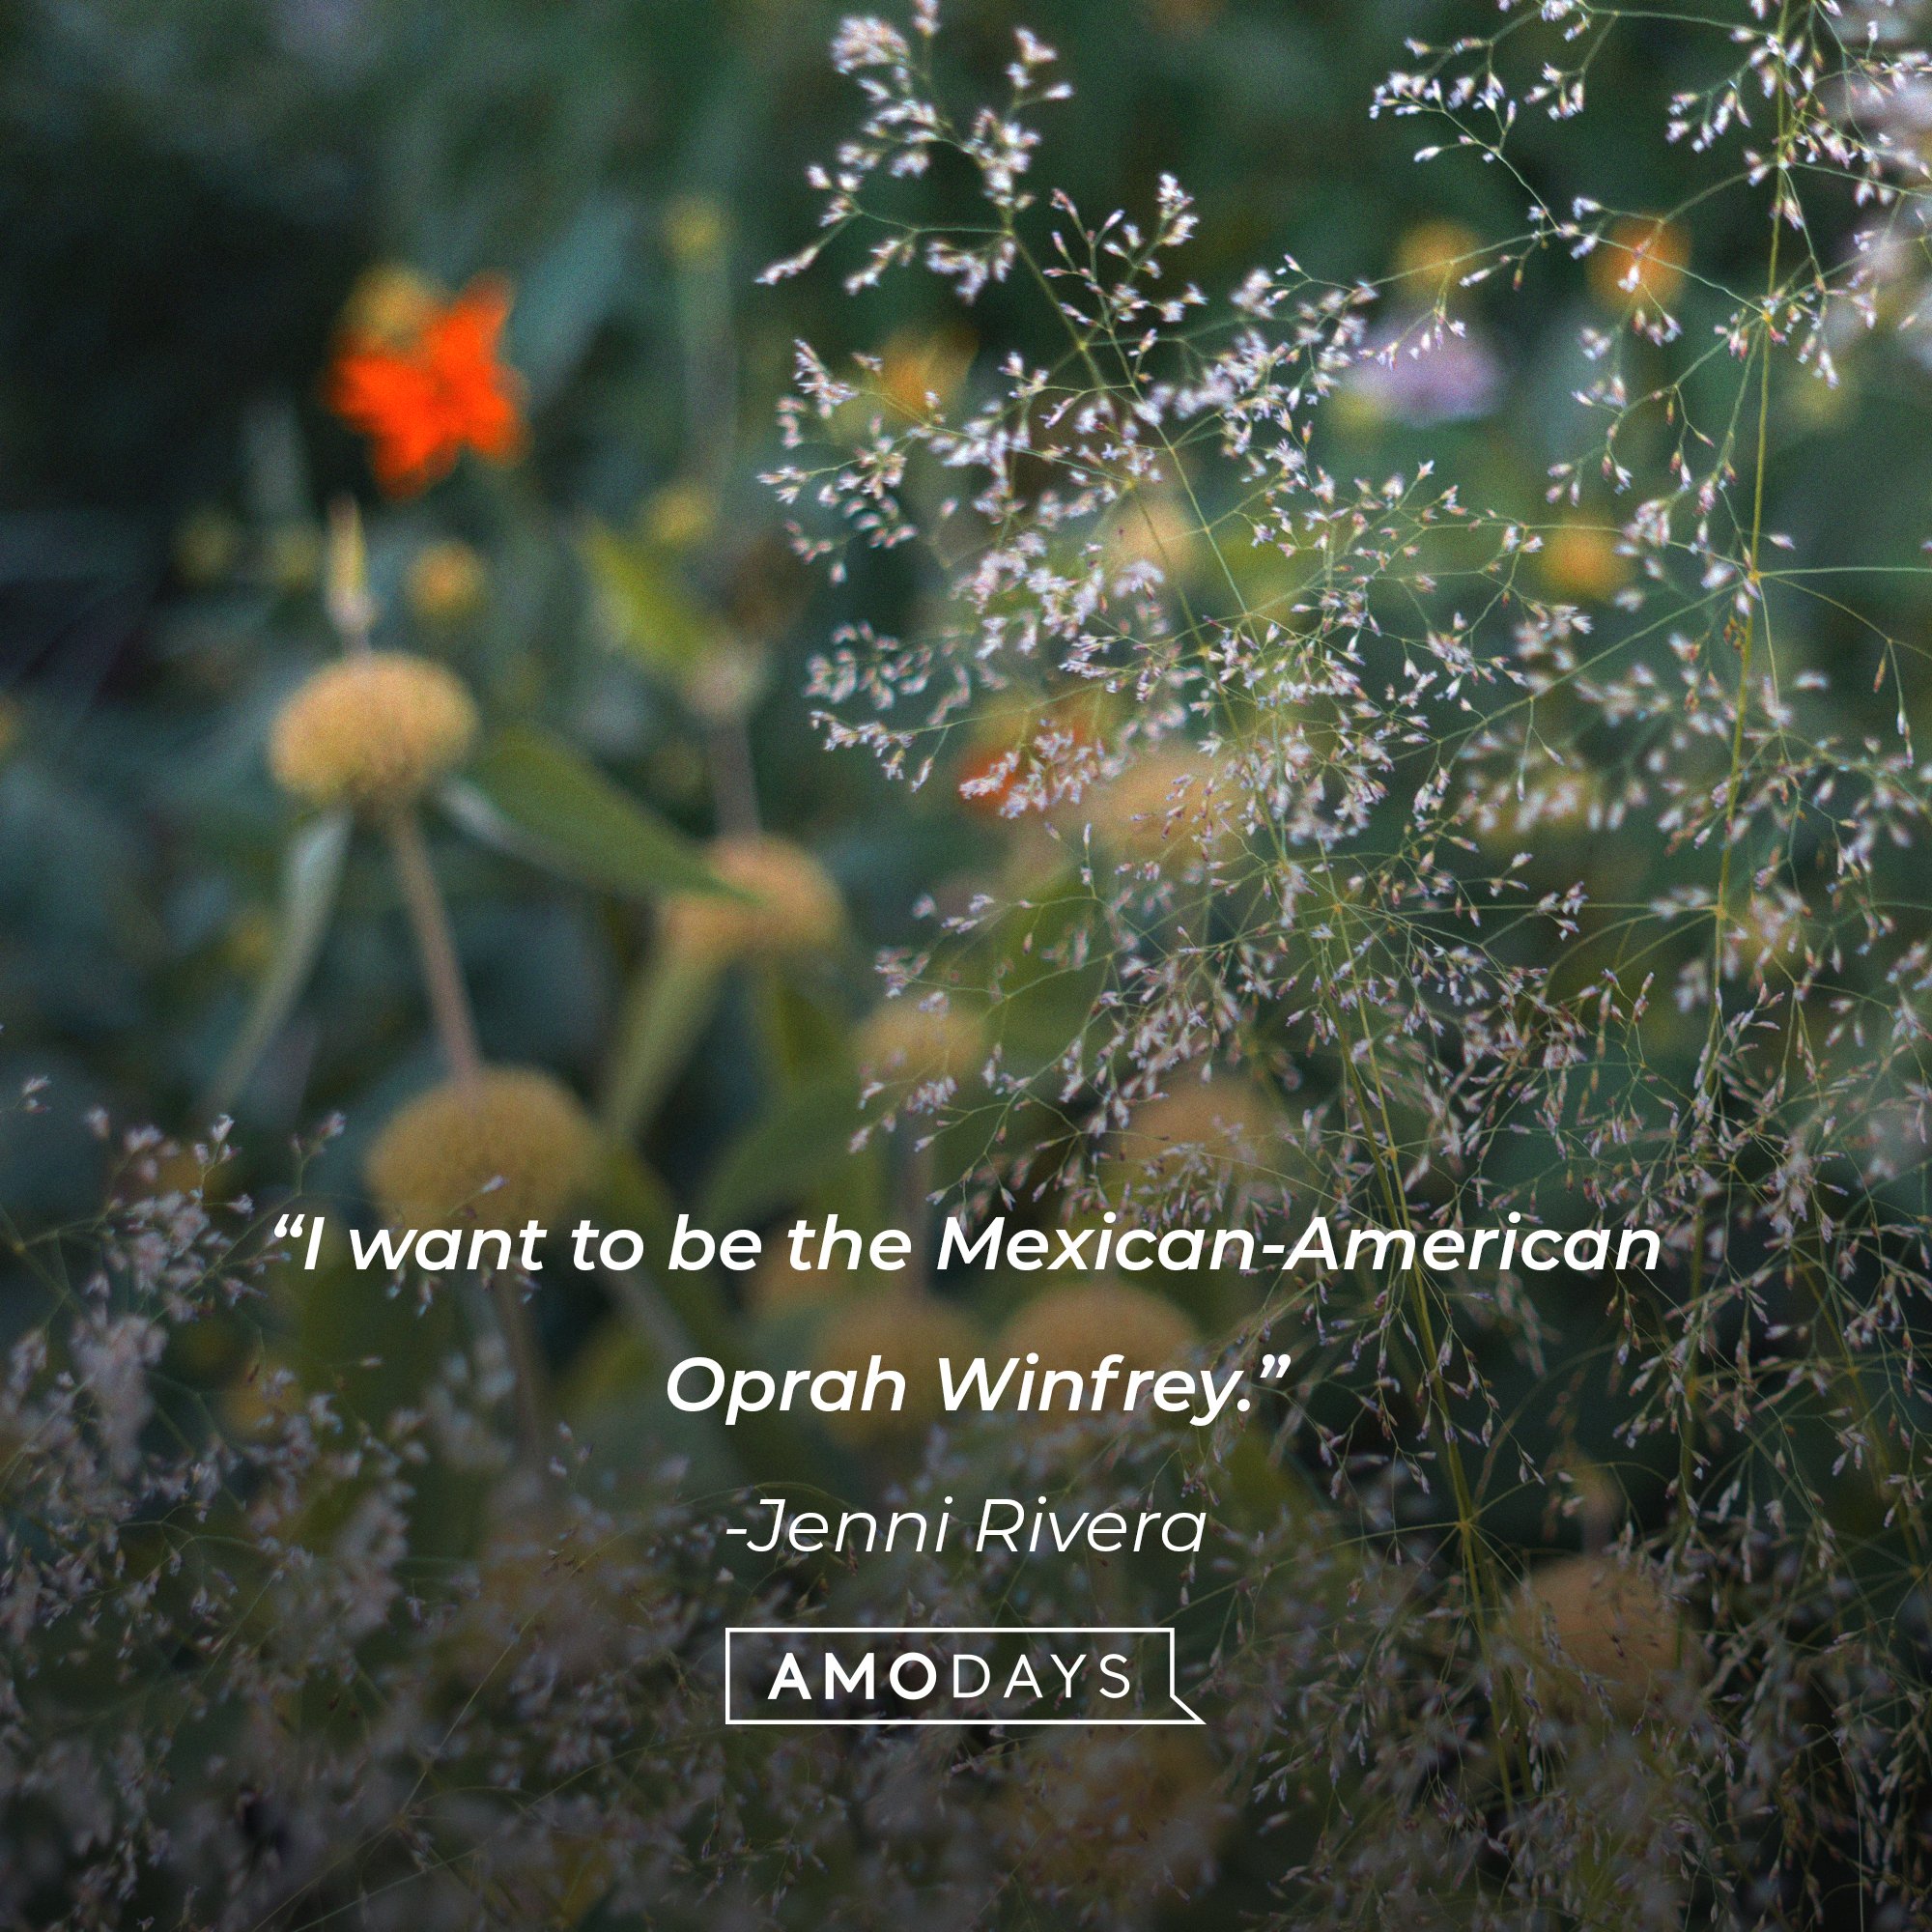 Jenni Rivera’s quote: "I want to be the Mexican-American Oprah Winfrey.” | Image: AmoDays